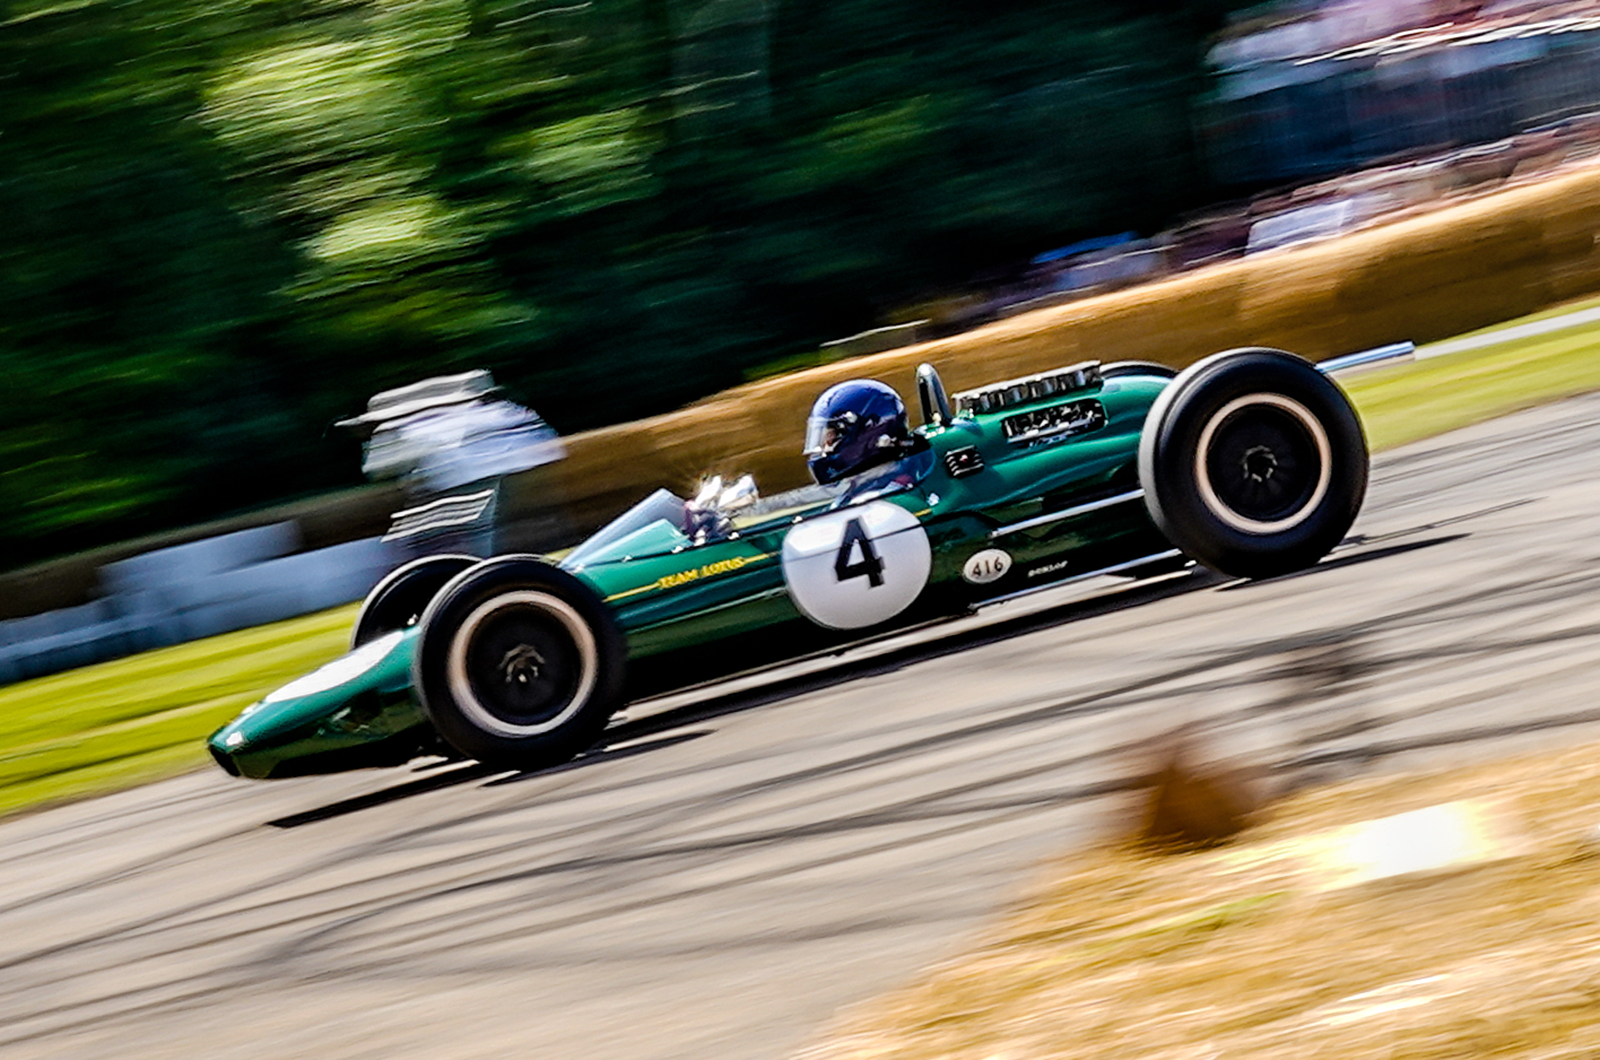 Classic & Sports Car – Lotus celebration announced for Goodwood Revival